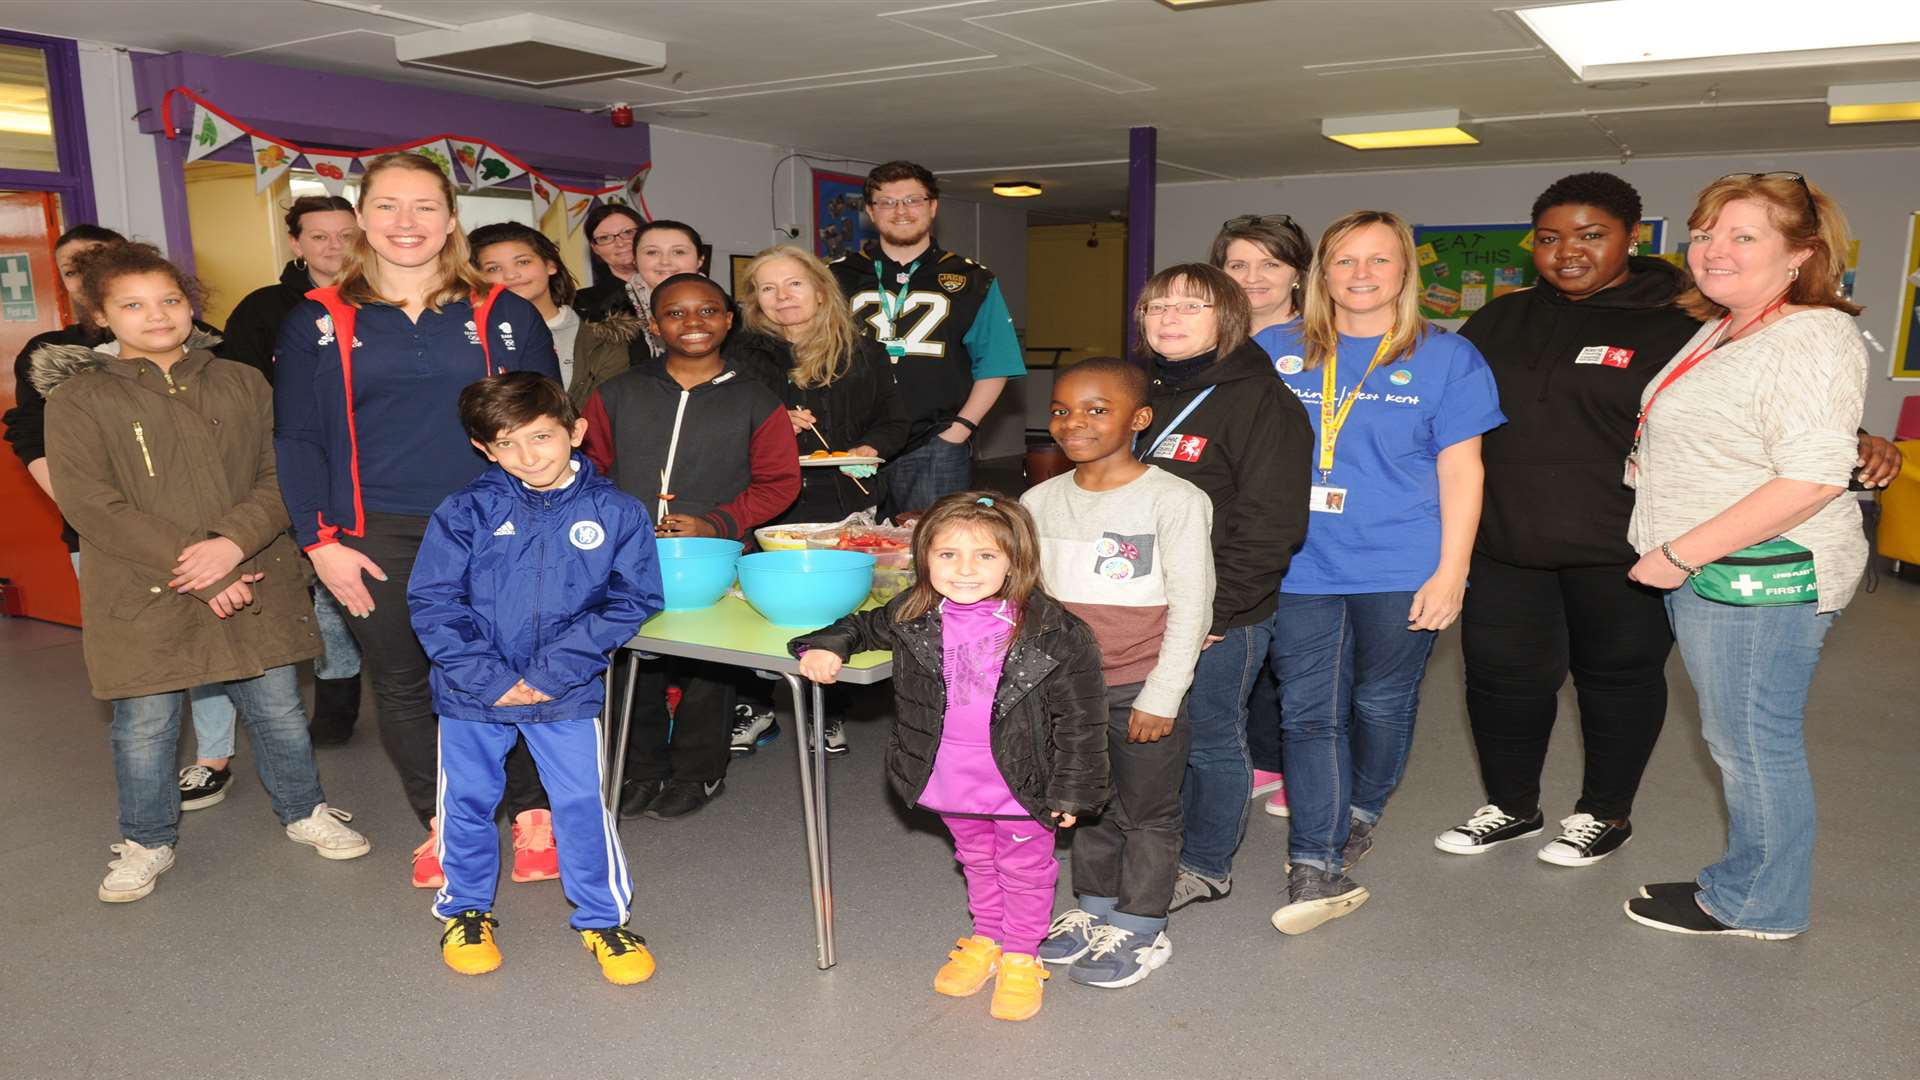 Lizzie Yarnold visiting Swanley Youth Hub, St Mary's Road, Swanley for a healthy fun day.